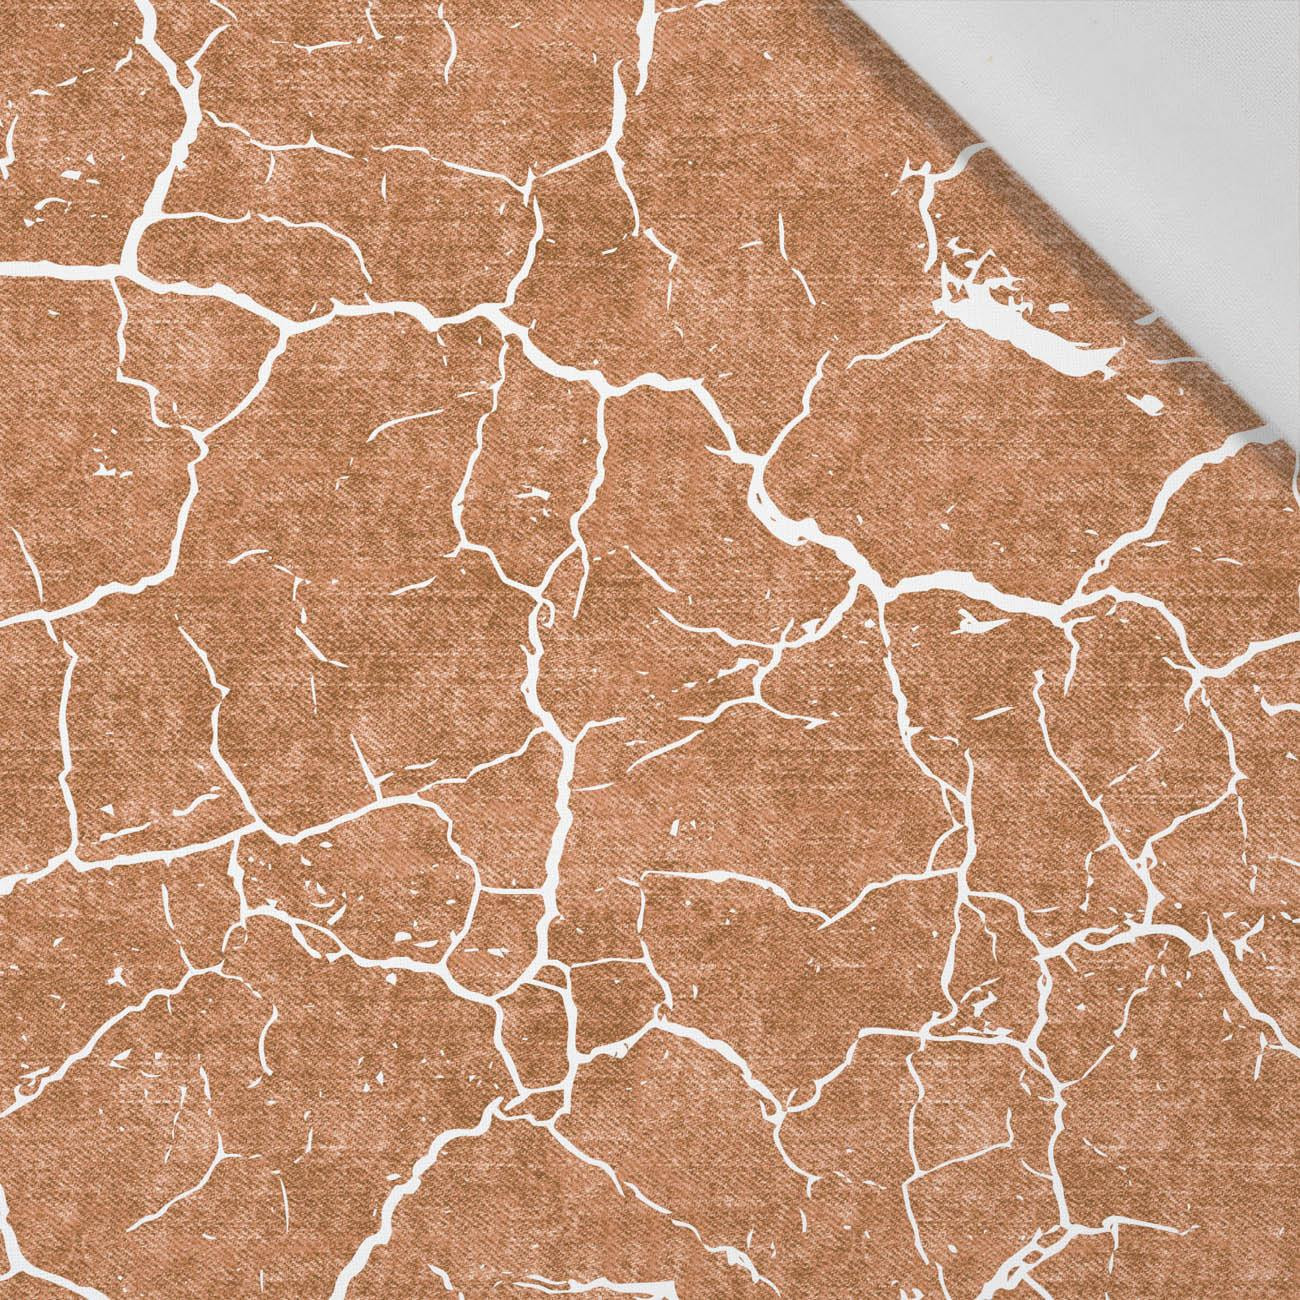 SCORCHED EARTH (white) / ACID WASH (caramel) - Cotton woven fabric